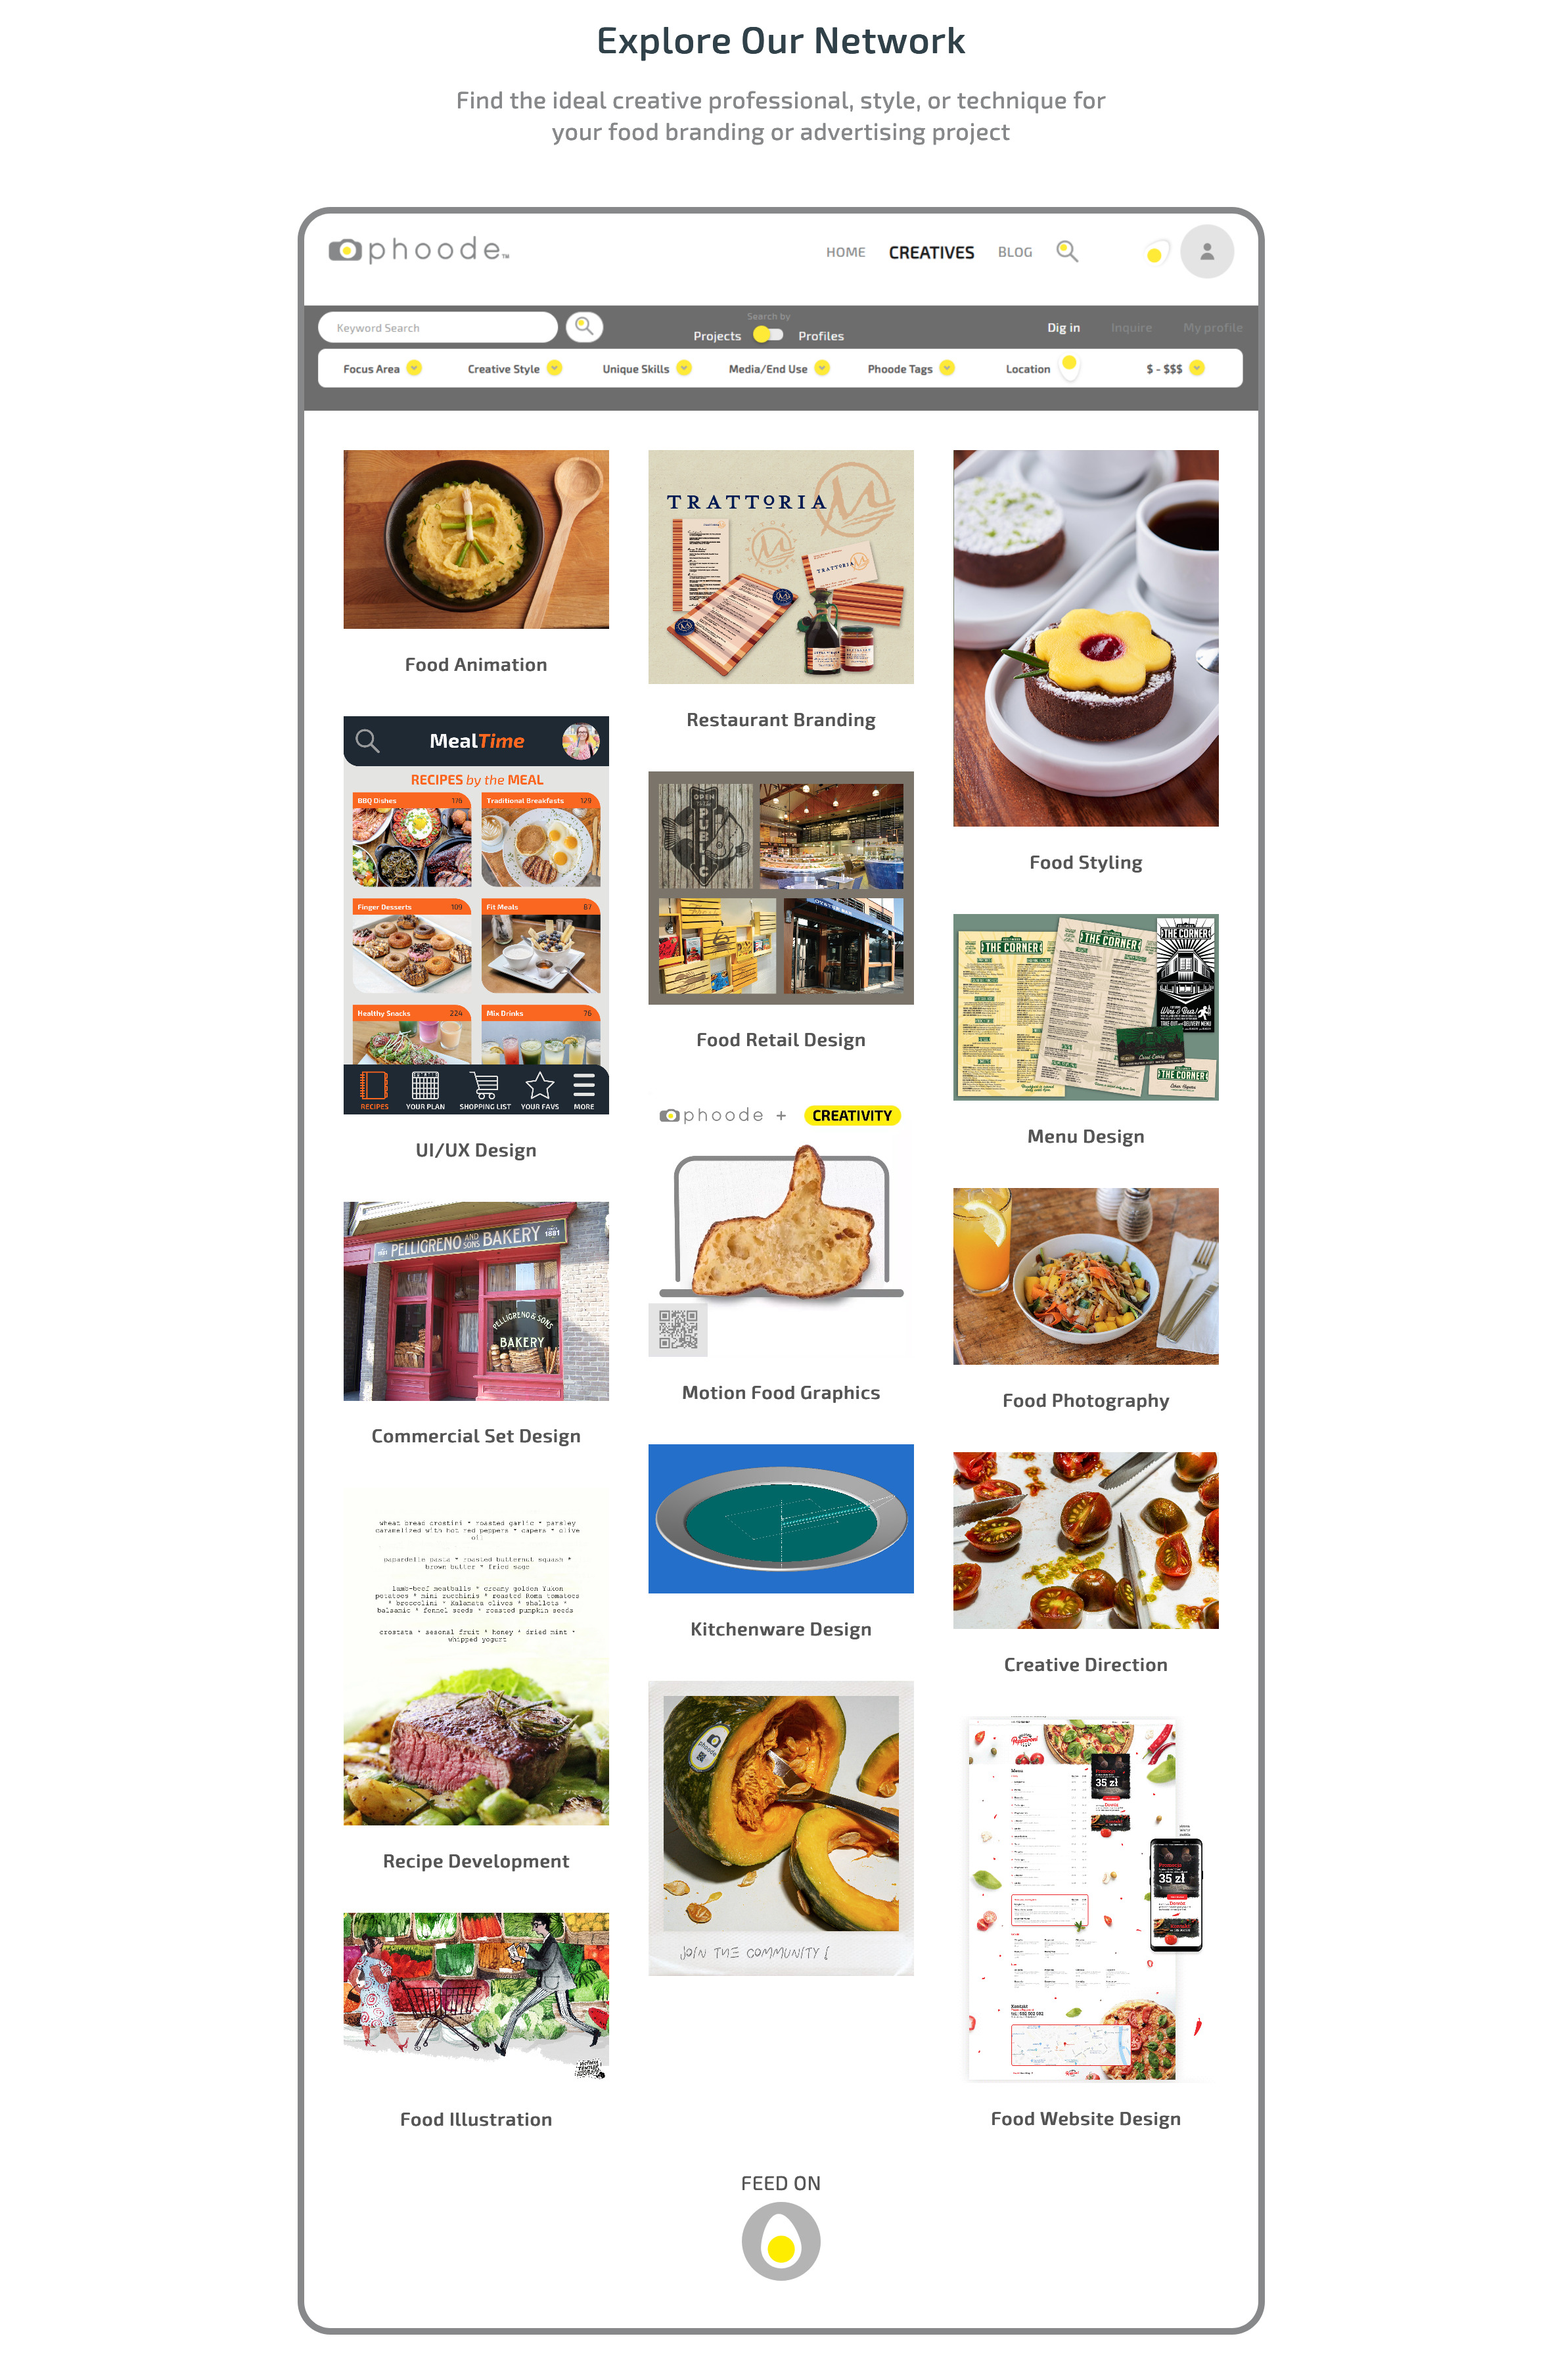 food marketing ideas, food photographers directory, food stylist directory, social network for food marketers, social network for food creatives, food advertising network, food branding network, Discover hire food photographers food stylists